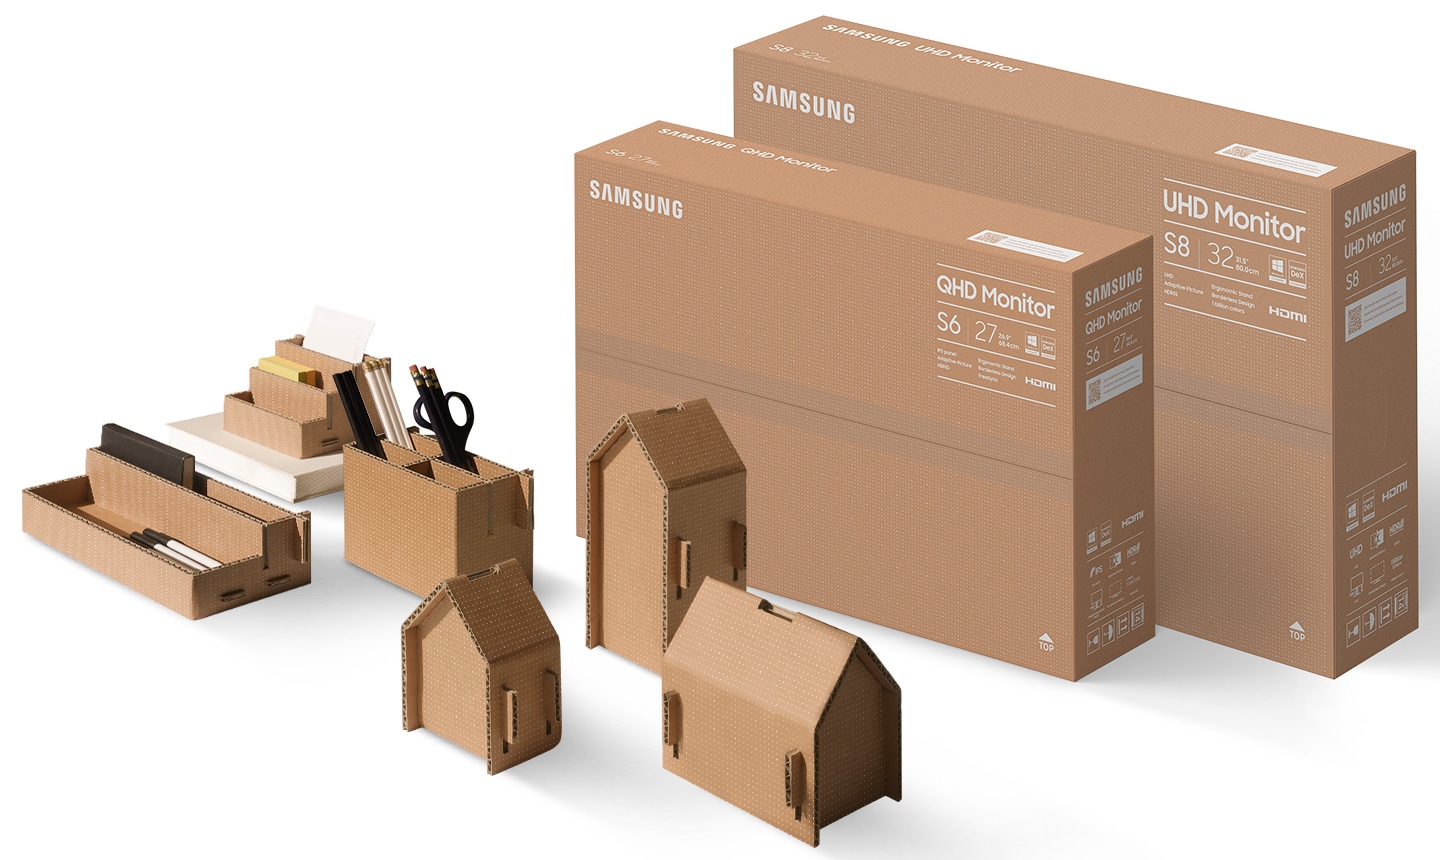 There are S8 32\ and S6 27\ packing boxes, and in front of them are boxed pencil holders, organizers, and small items.